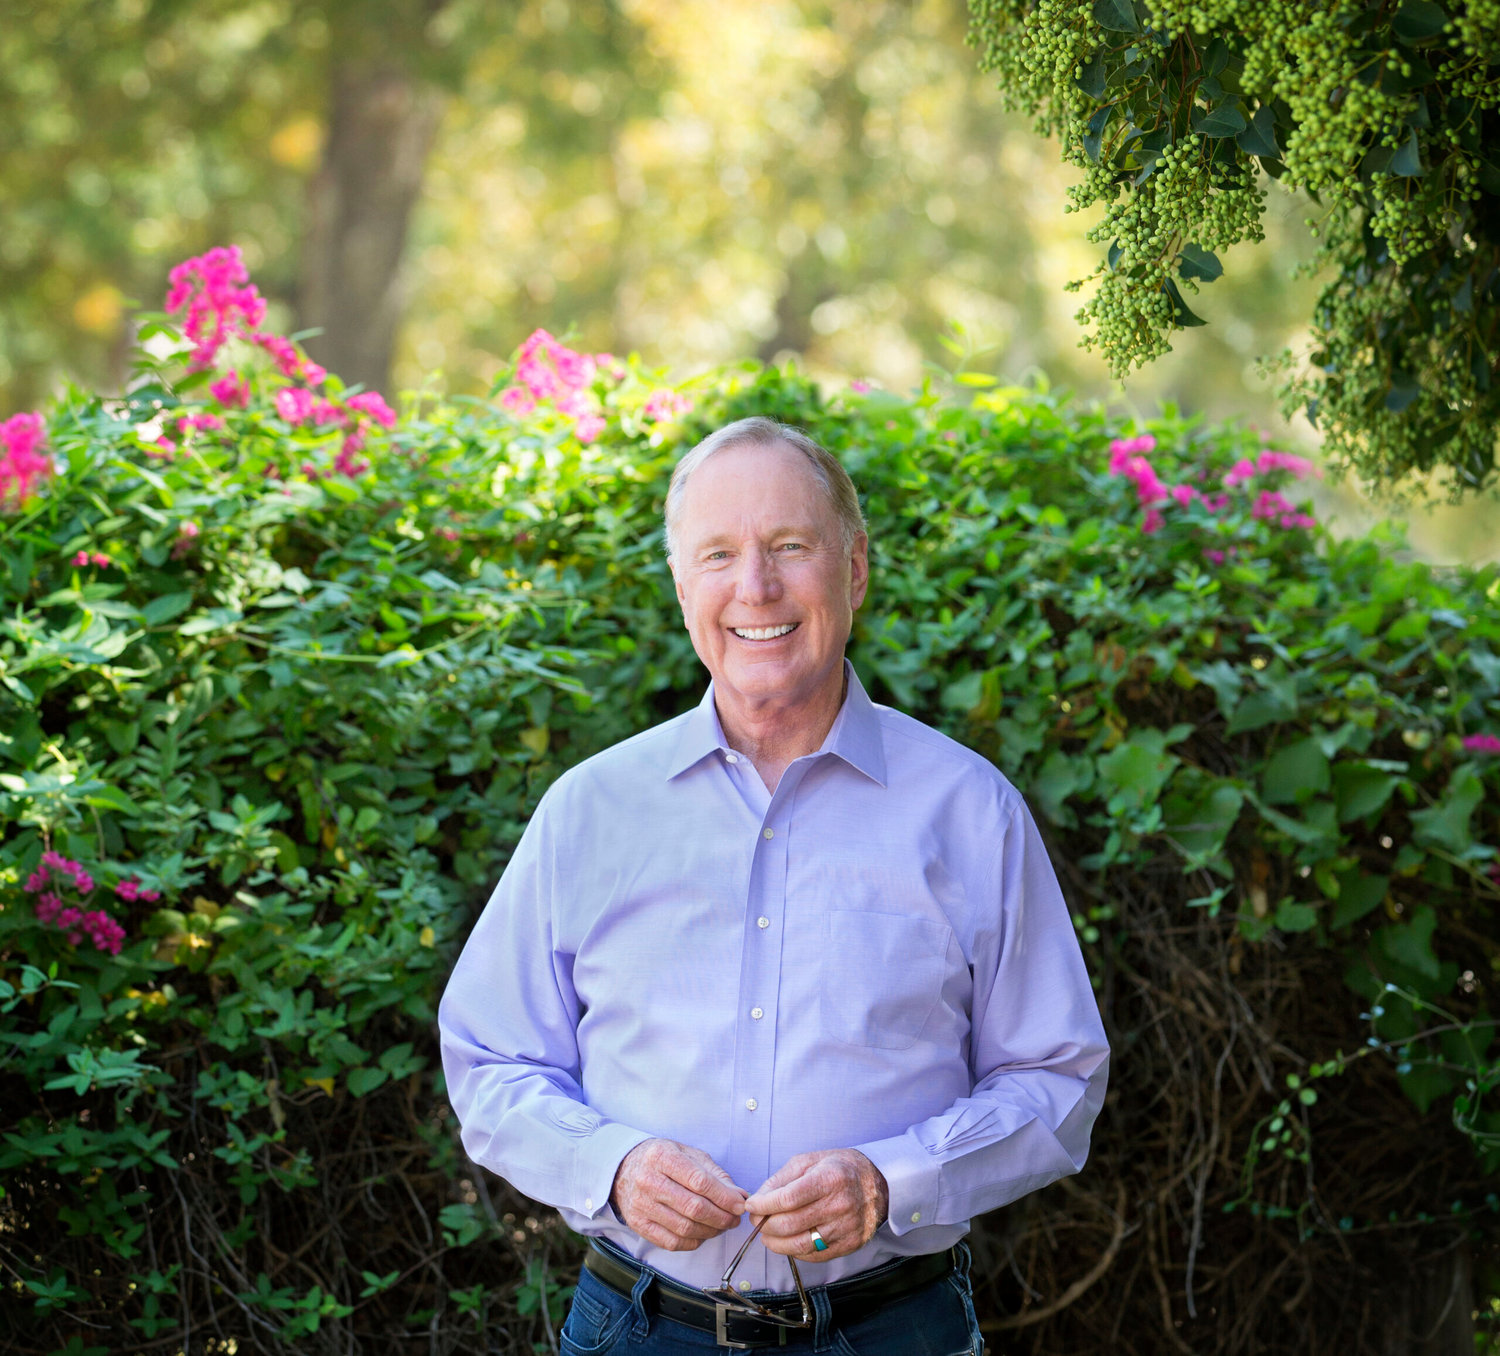 Max Lucado.  This photo is being used for non-commercial purpose and not in connection with selling a good or service.